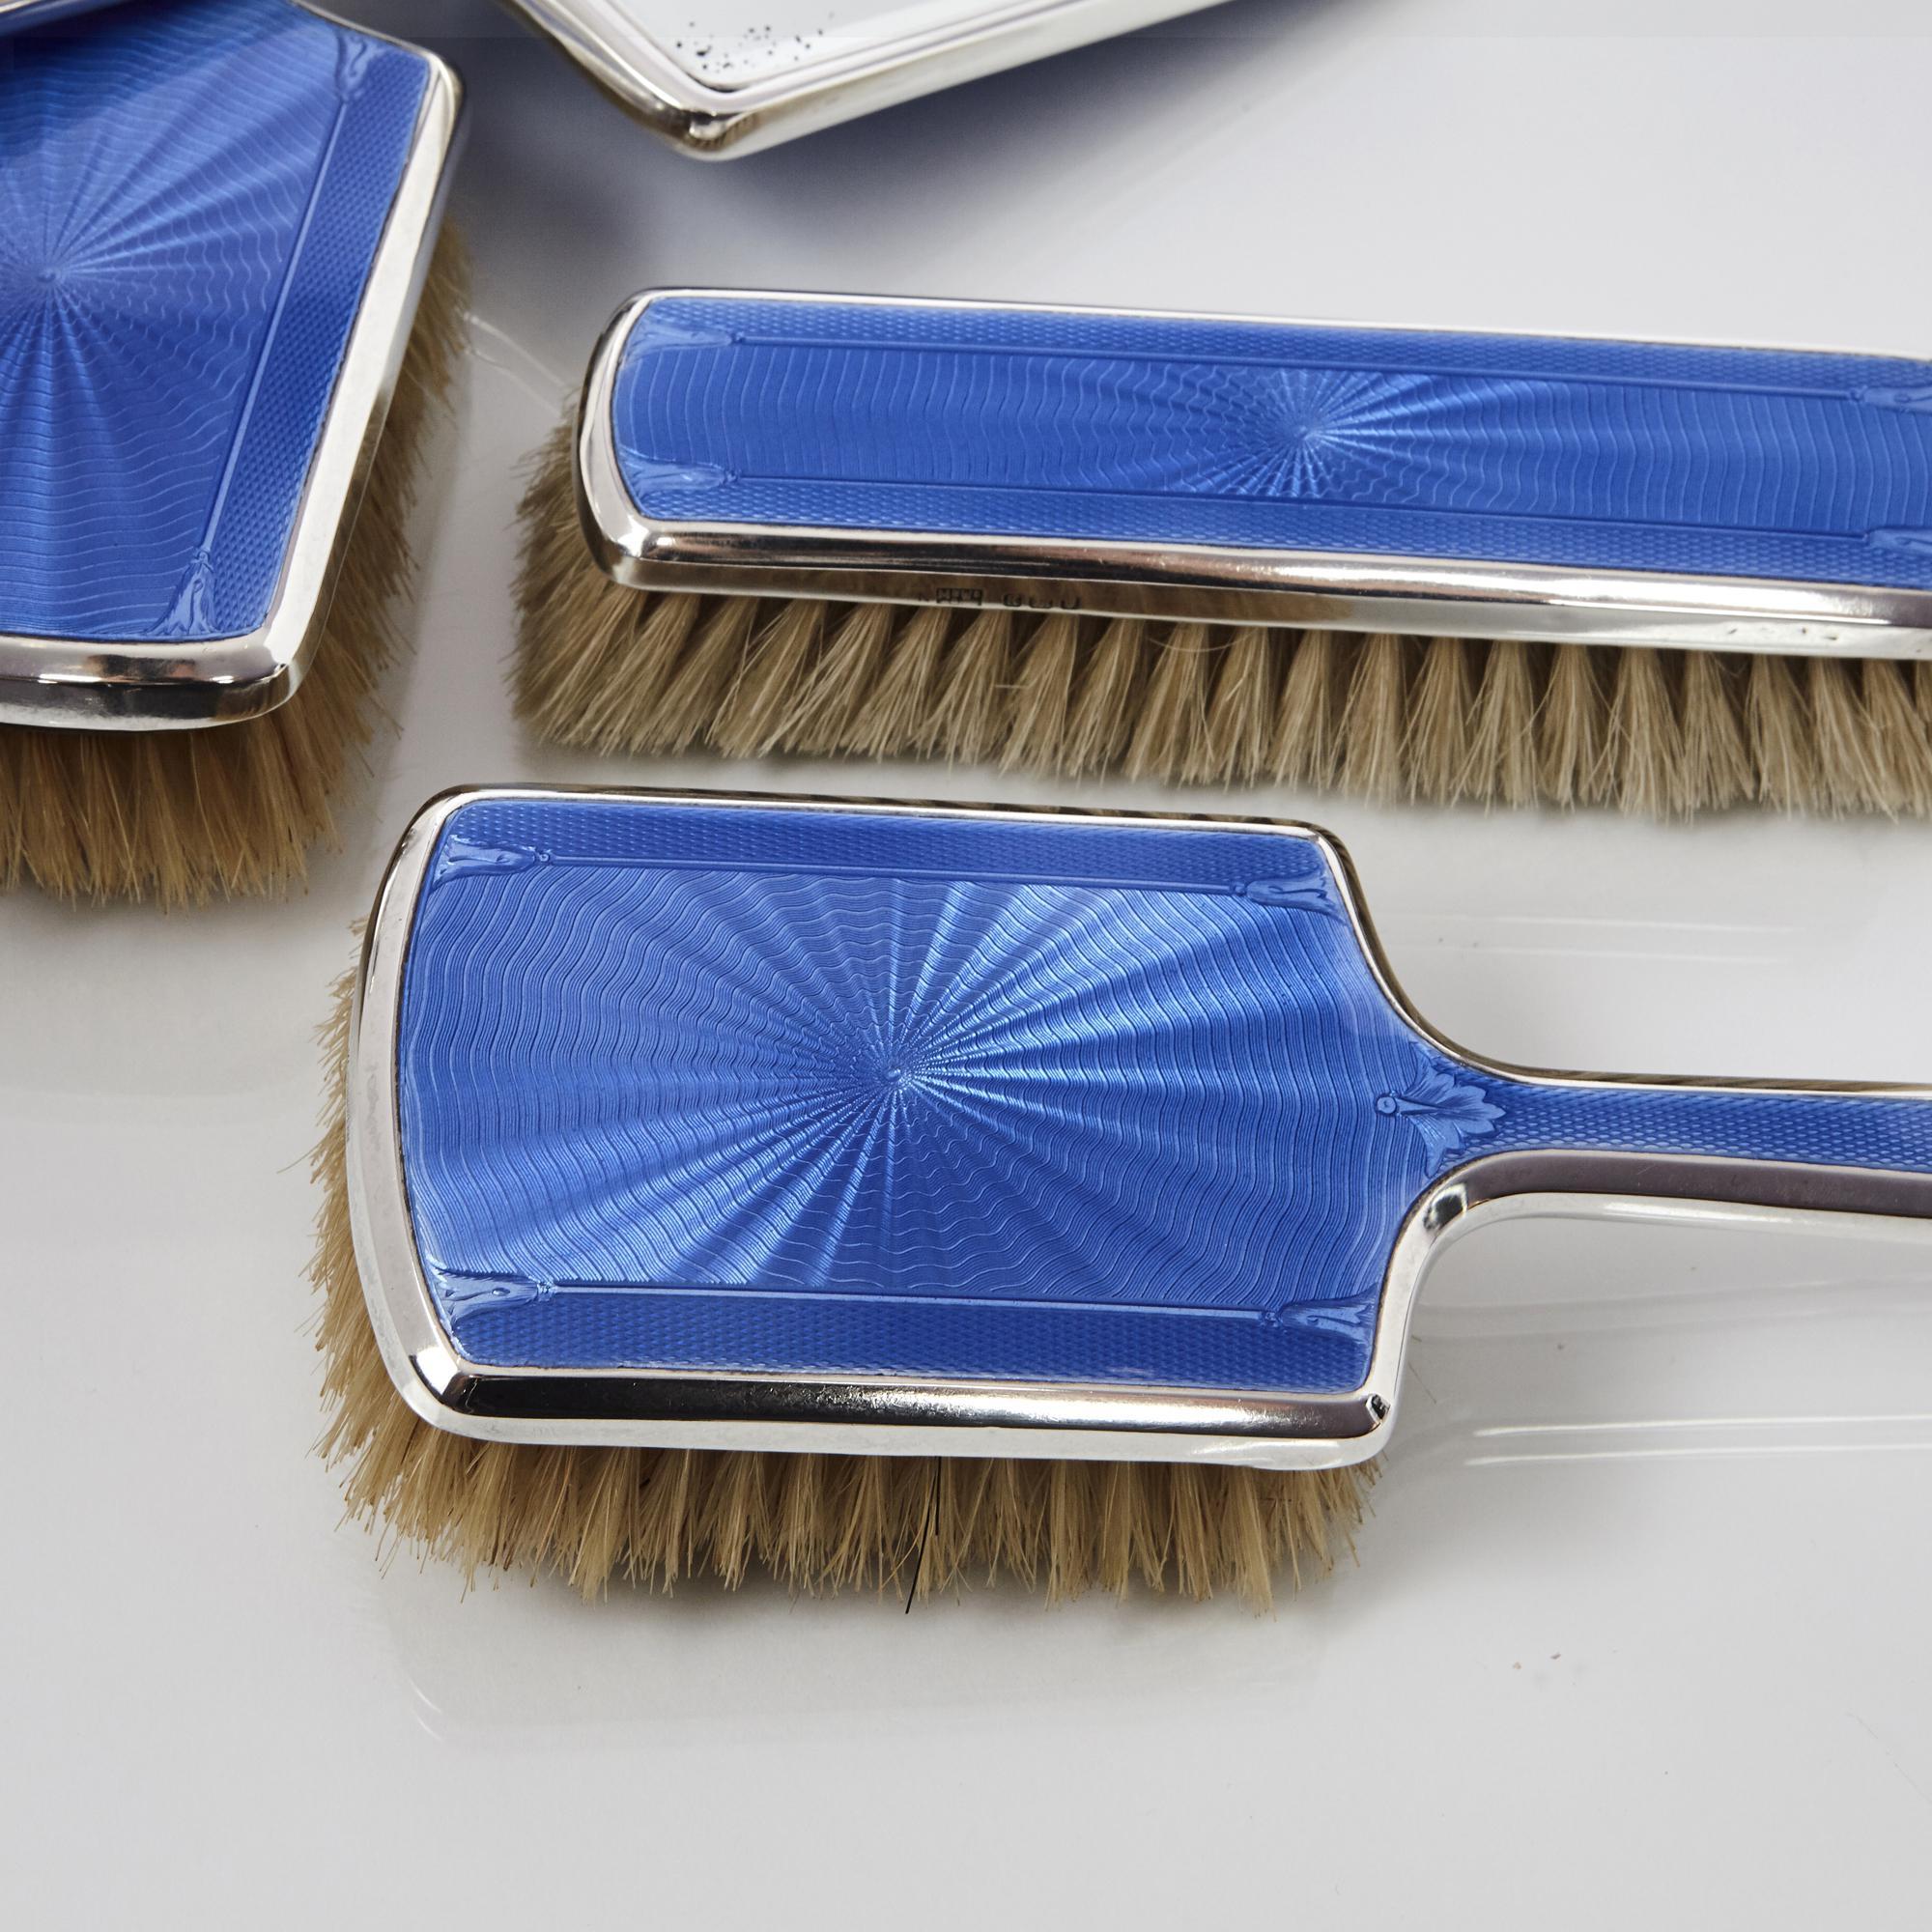 Classic, five-piece, blue enamel silver dressing table set comprising two hair brushes, two clothes brushes and a hand mirror, all in original and excellent condition. Each piece is finely engraved with engine-turned patterns and incorporates